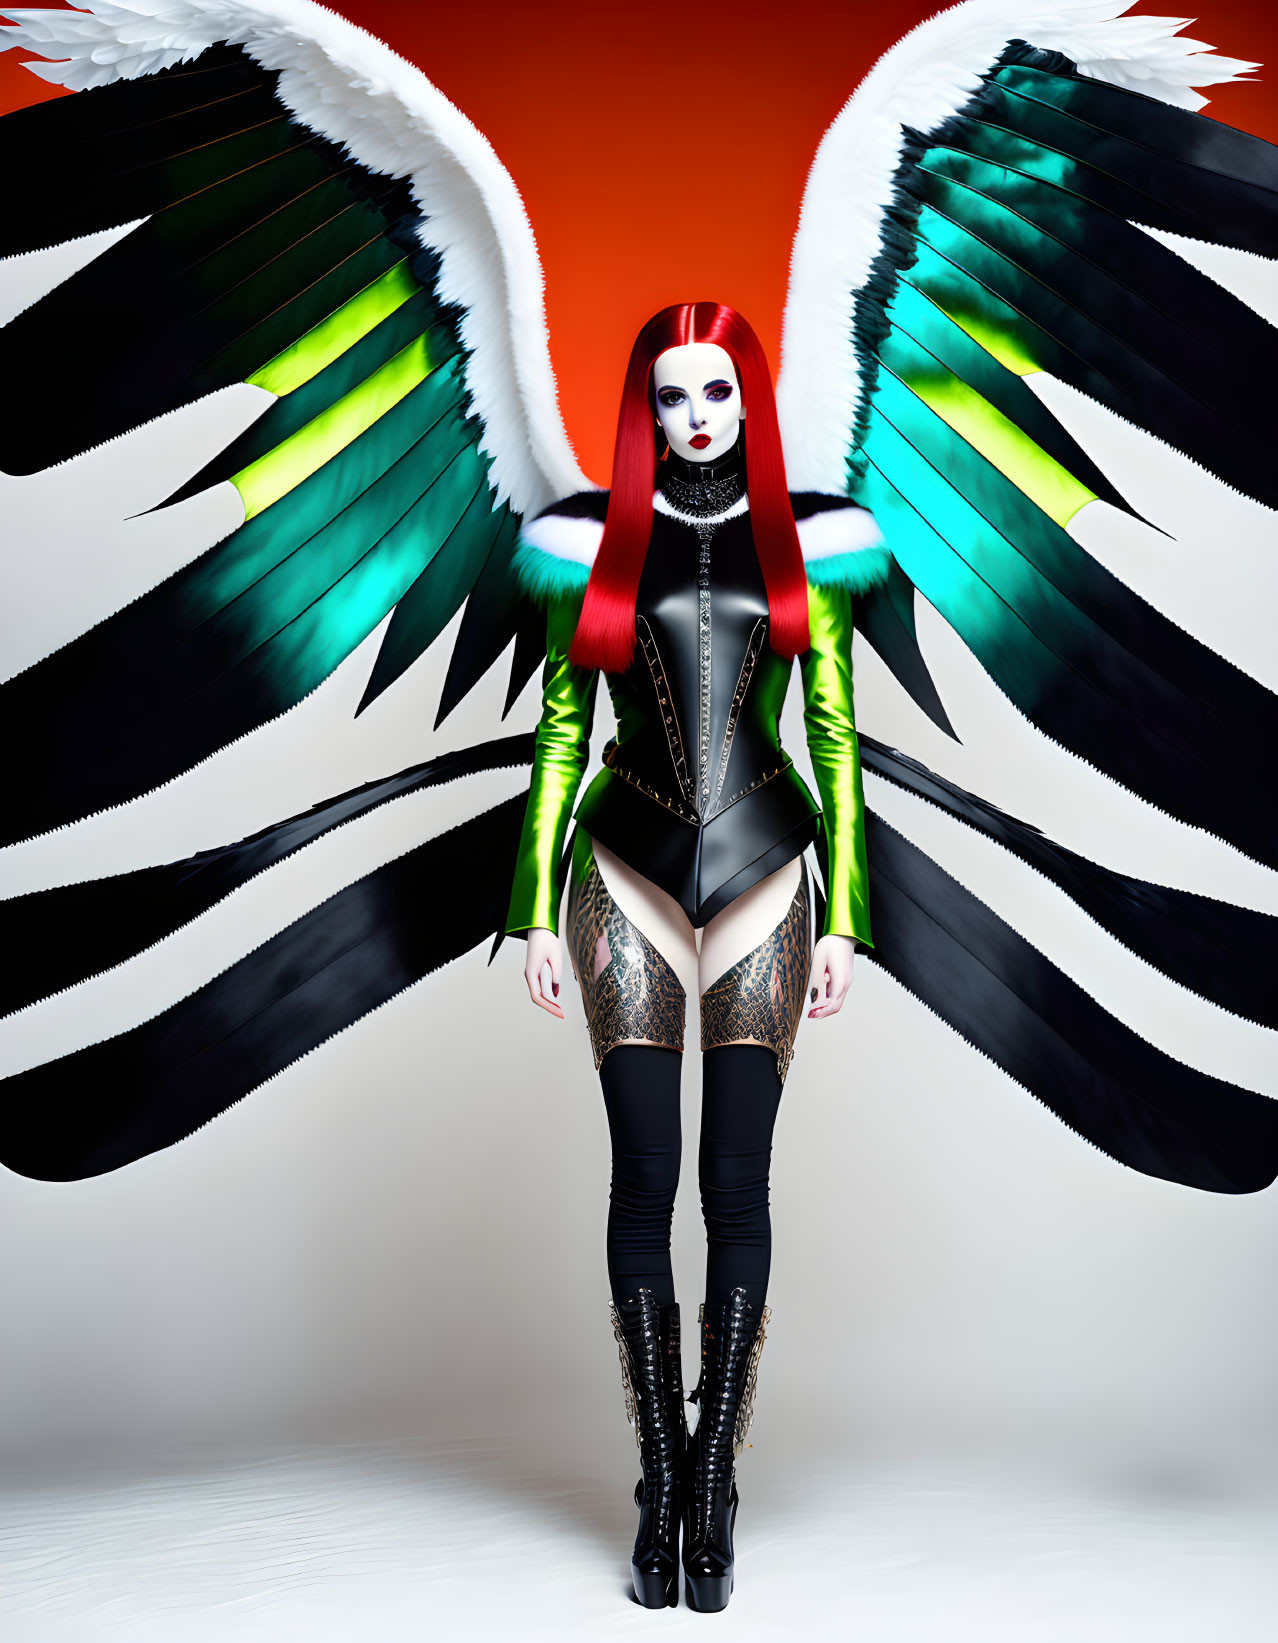 Vibrant red hair, striking makeup, futuristic outfit, black and white wings with green highlights